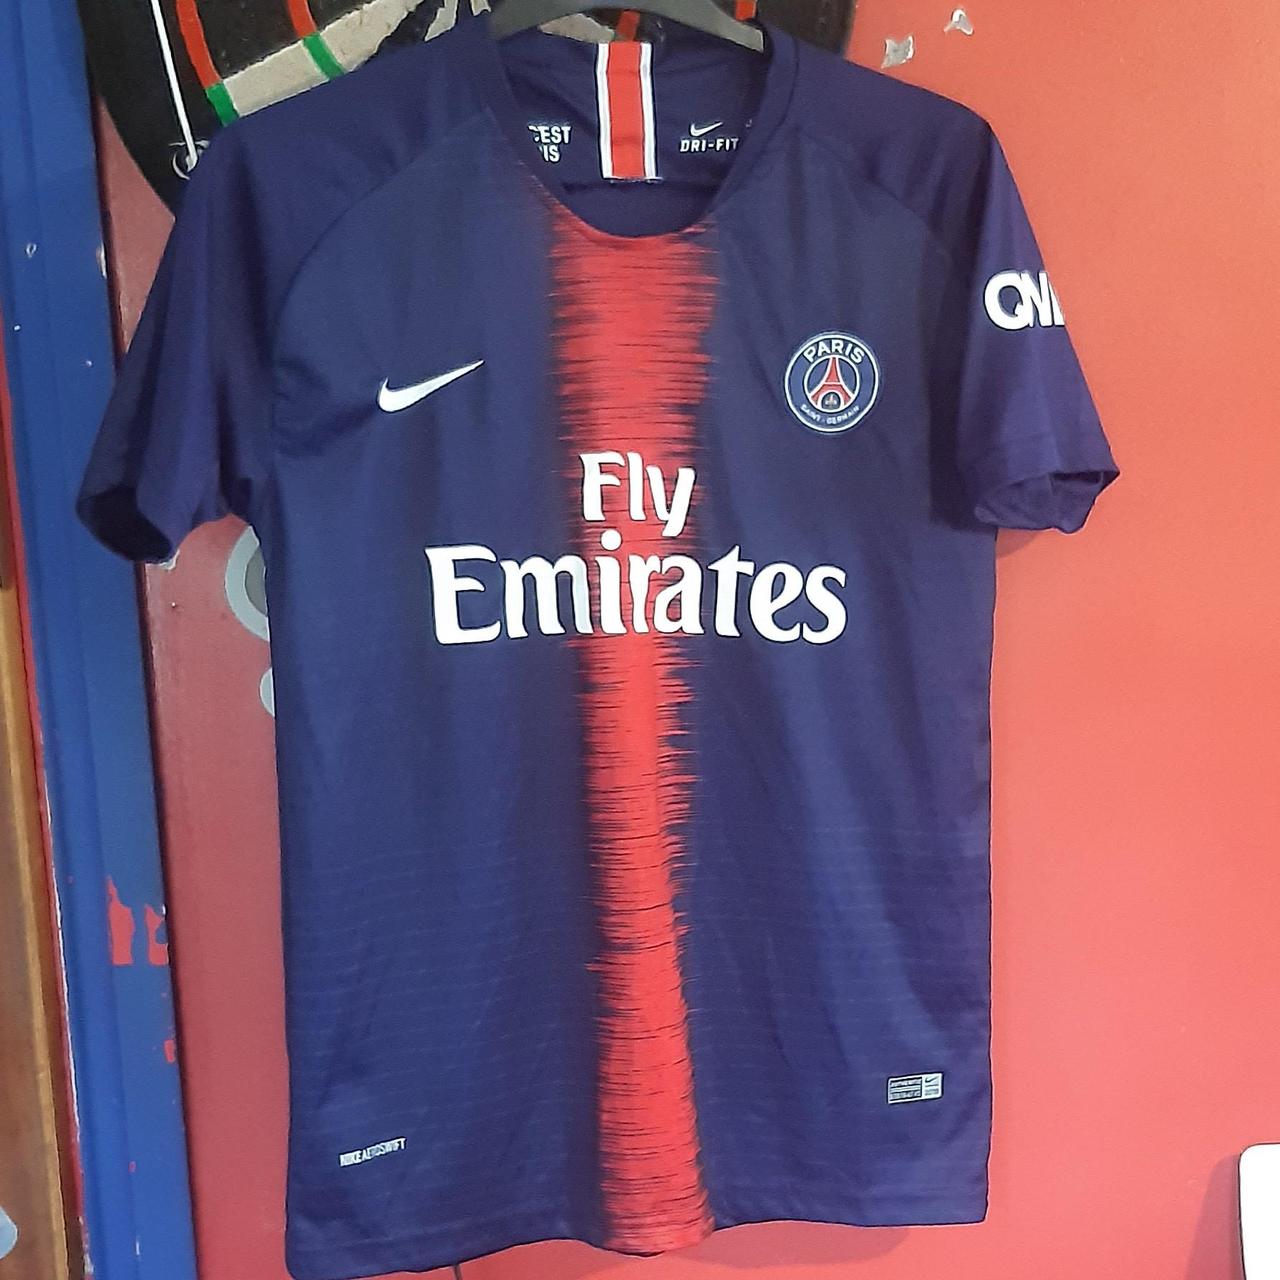 Product Image 1 - Nike Paris St Germain
French football